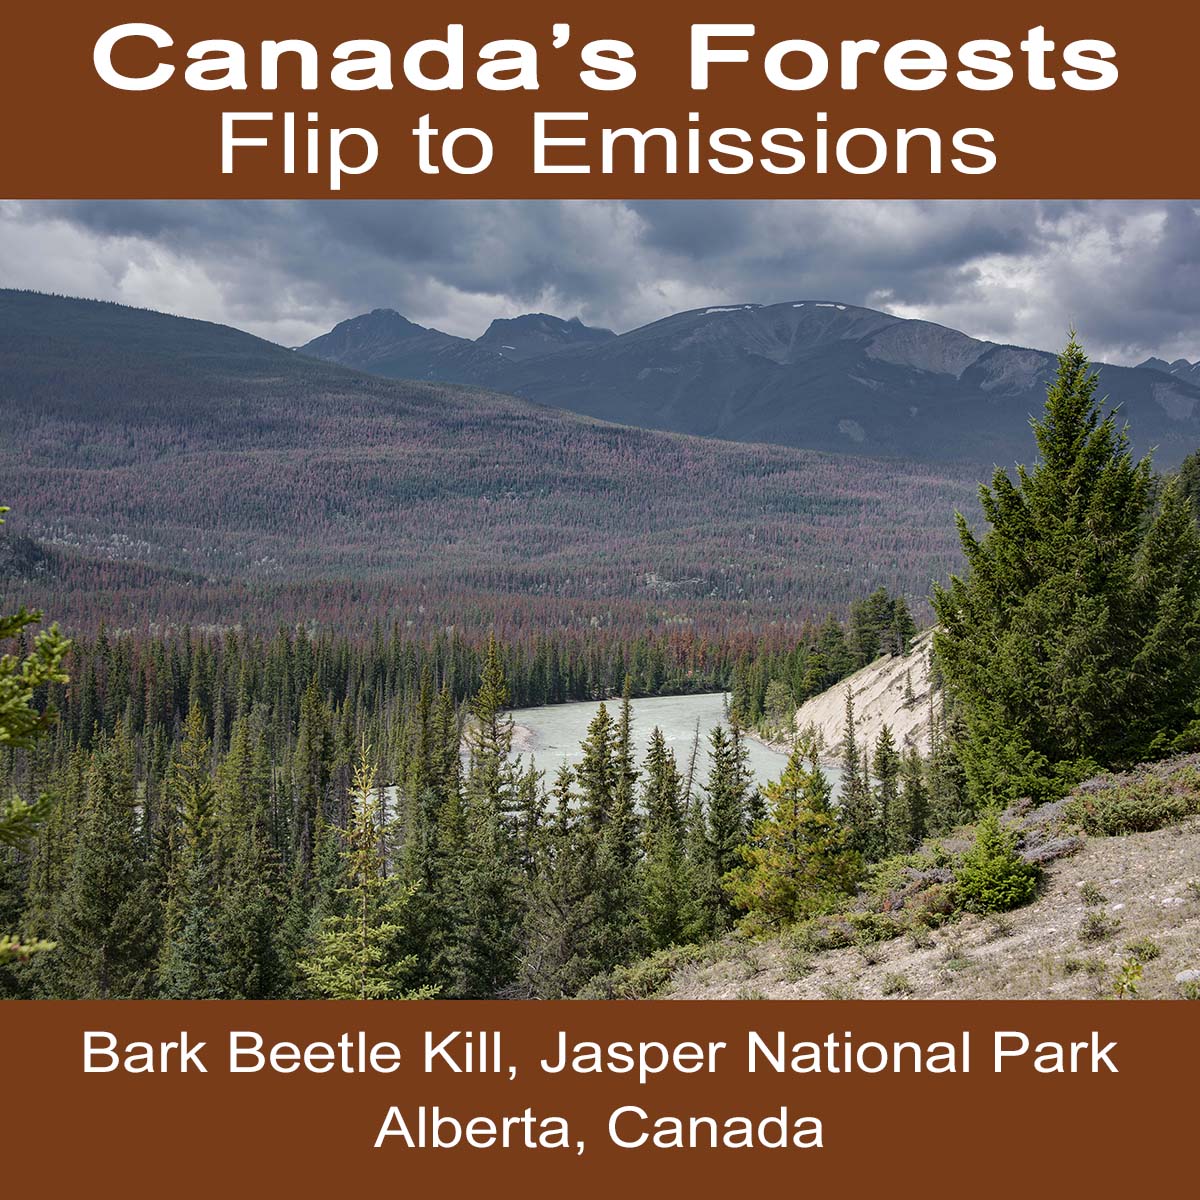 Canada’s Forests Have Flipped From Carbon Sink to Greenhouse Gas Emissions